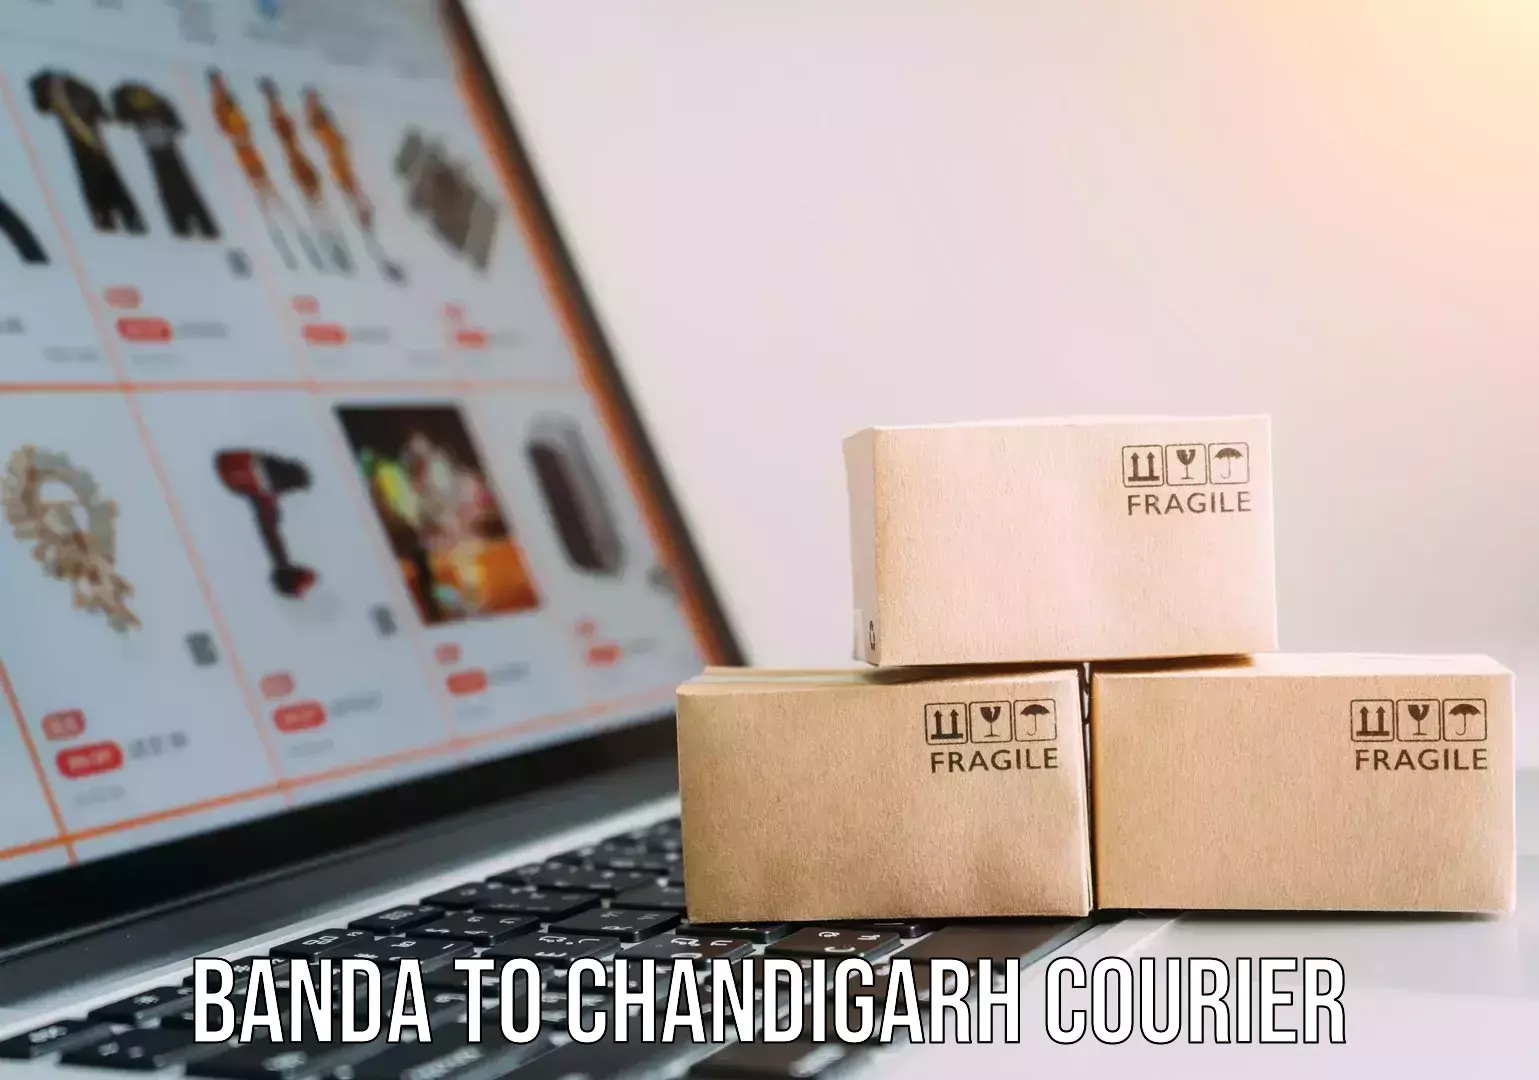 Next-generation courier services Banda to Chandigarh